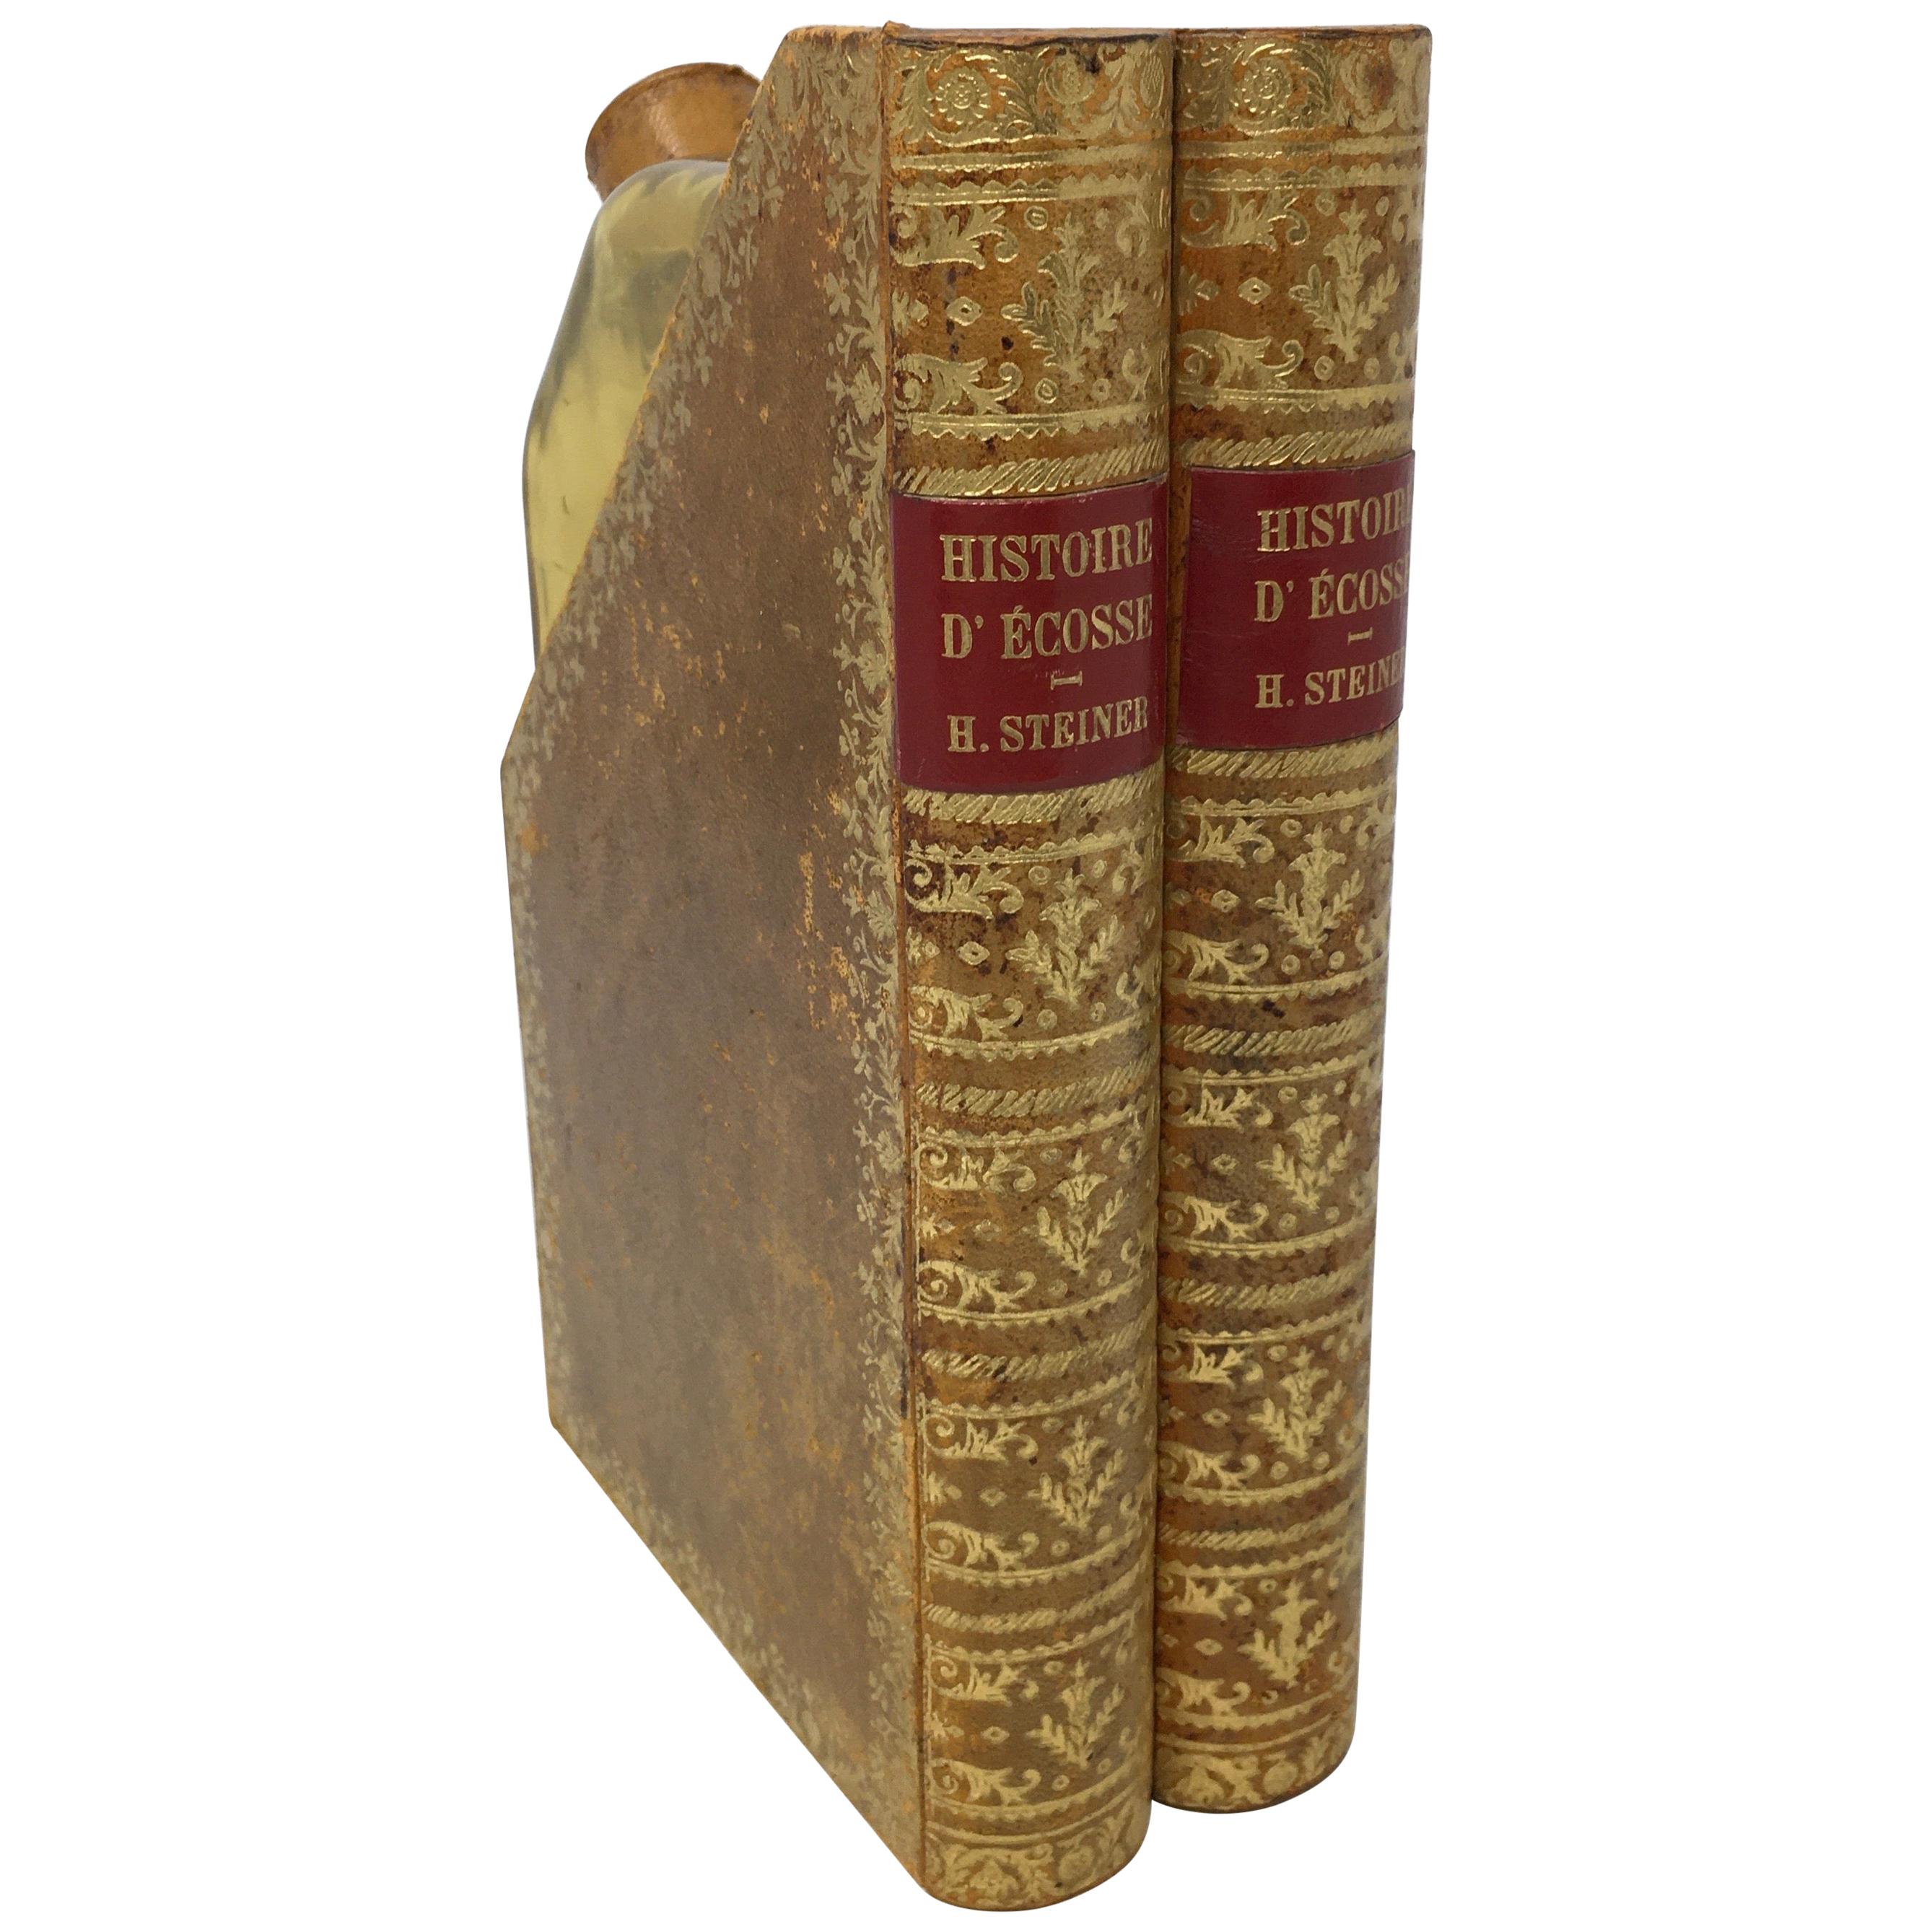 Collectible Faux Book with Two Hidden Flasks